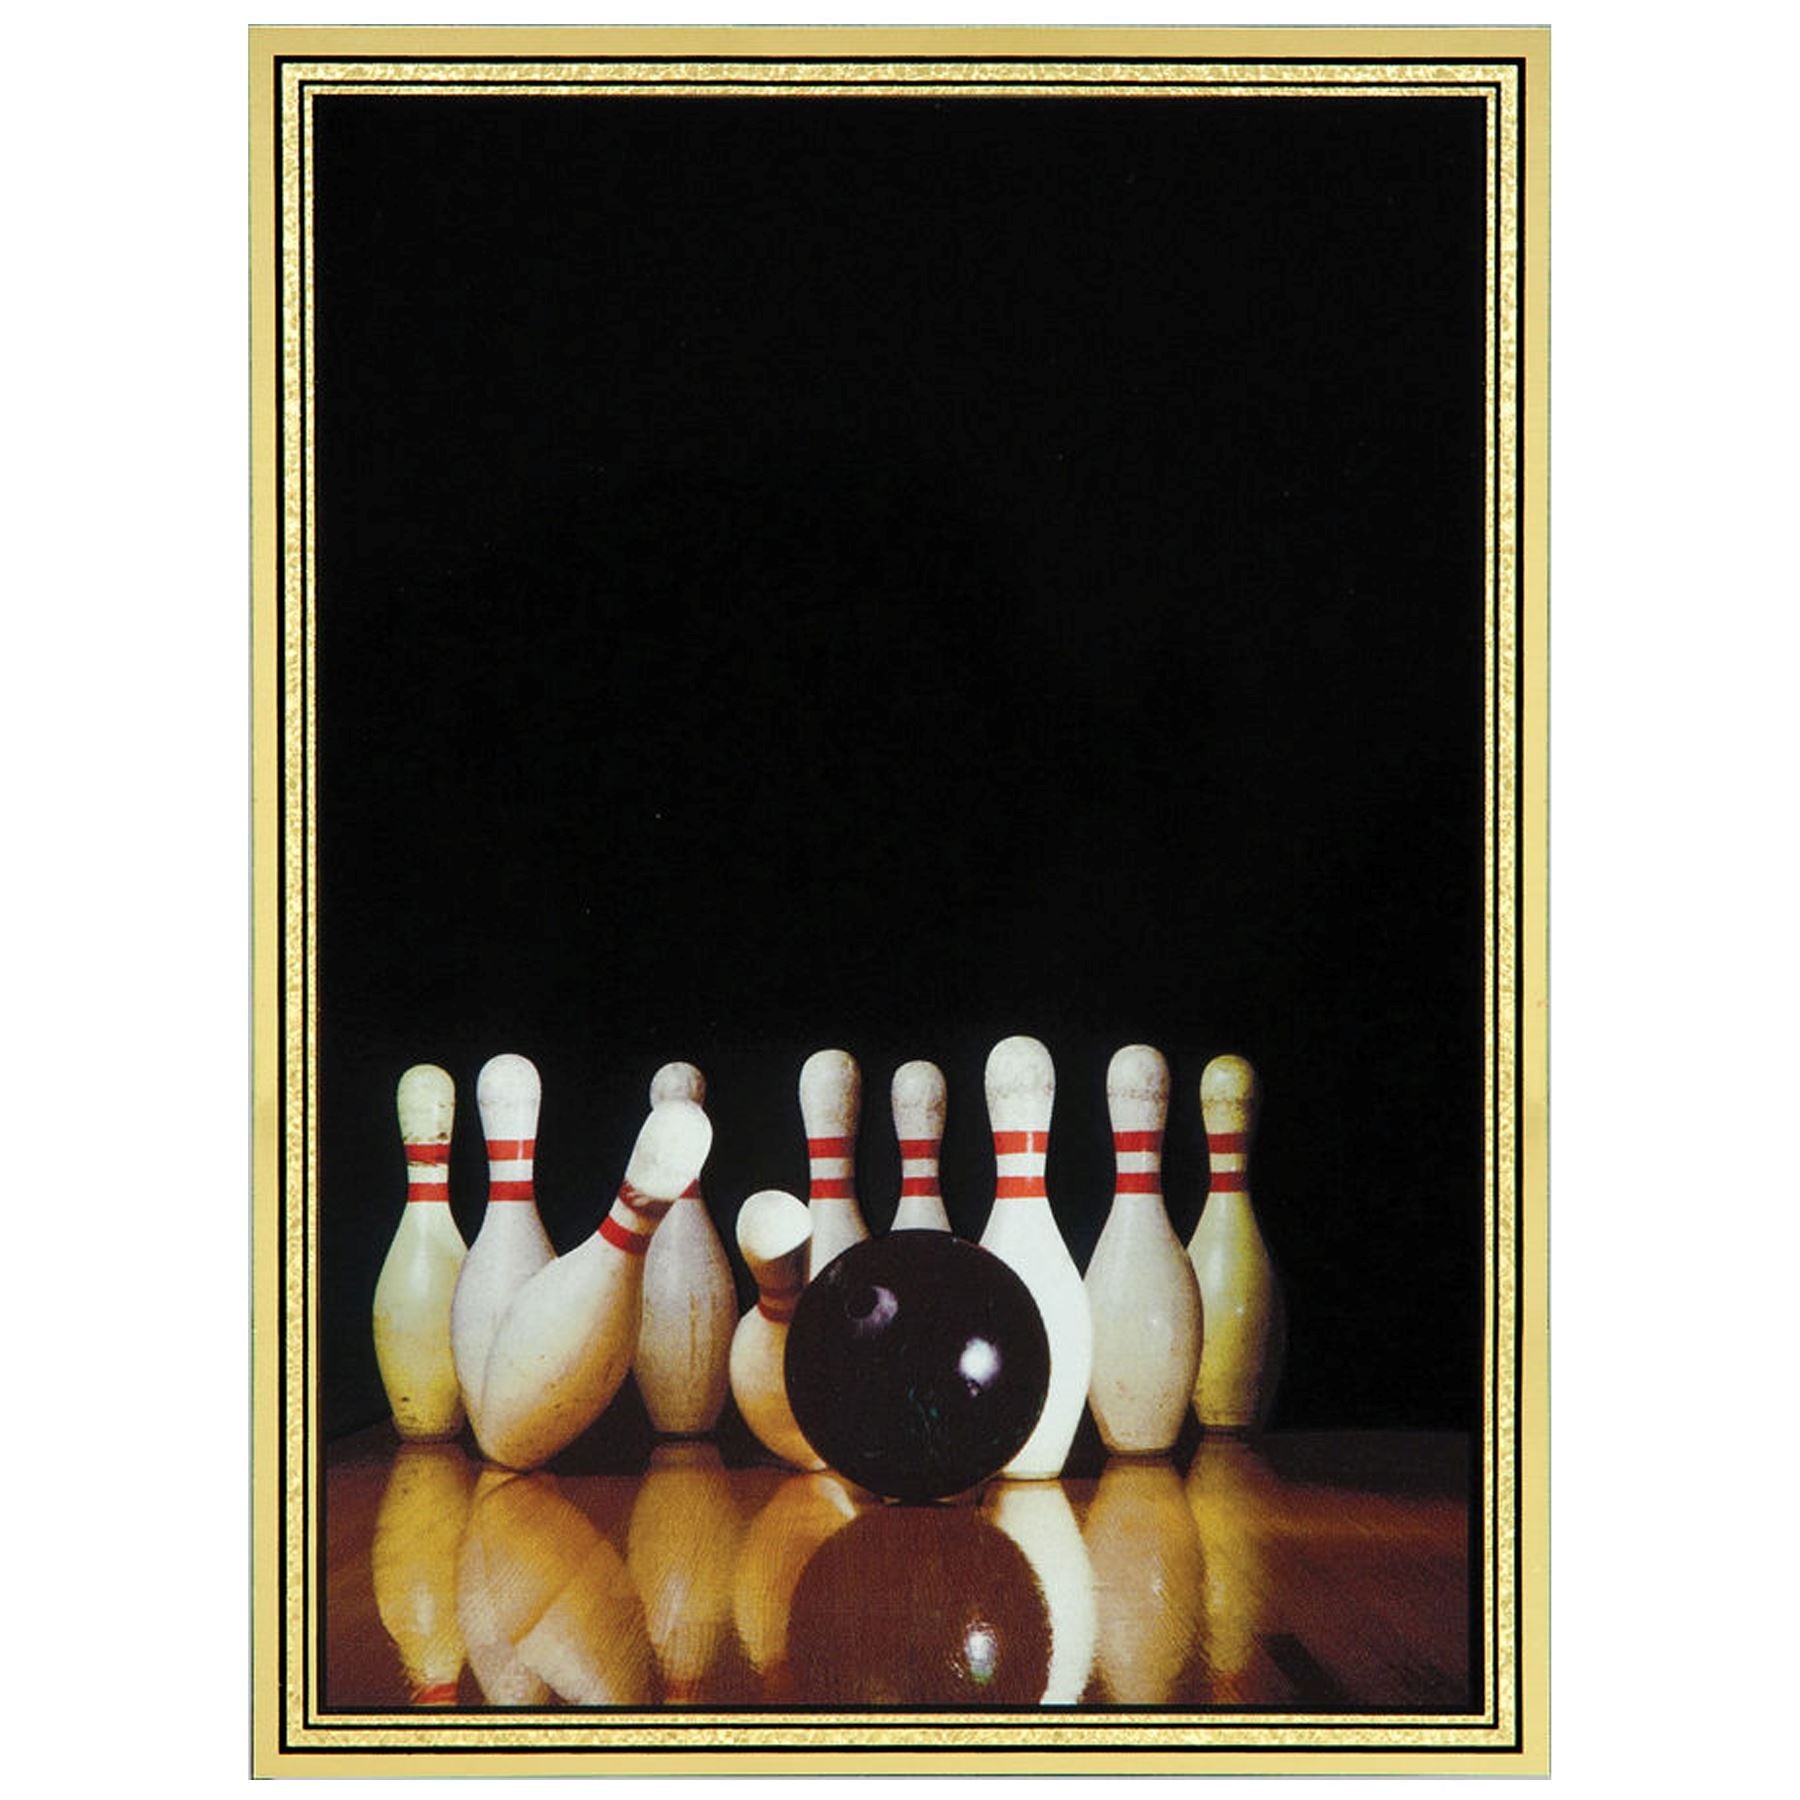 Brass Plated Steel Hi-Def Plaque Plate, Bowling, 5 7/8" x 7 7/8" Plaque Craftworks NW 